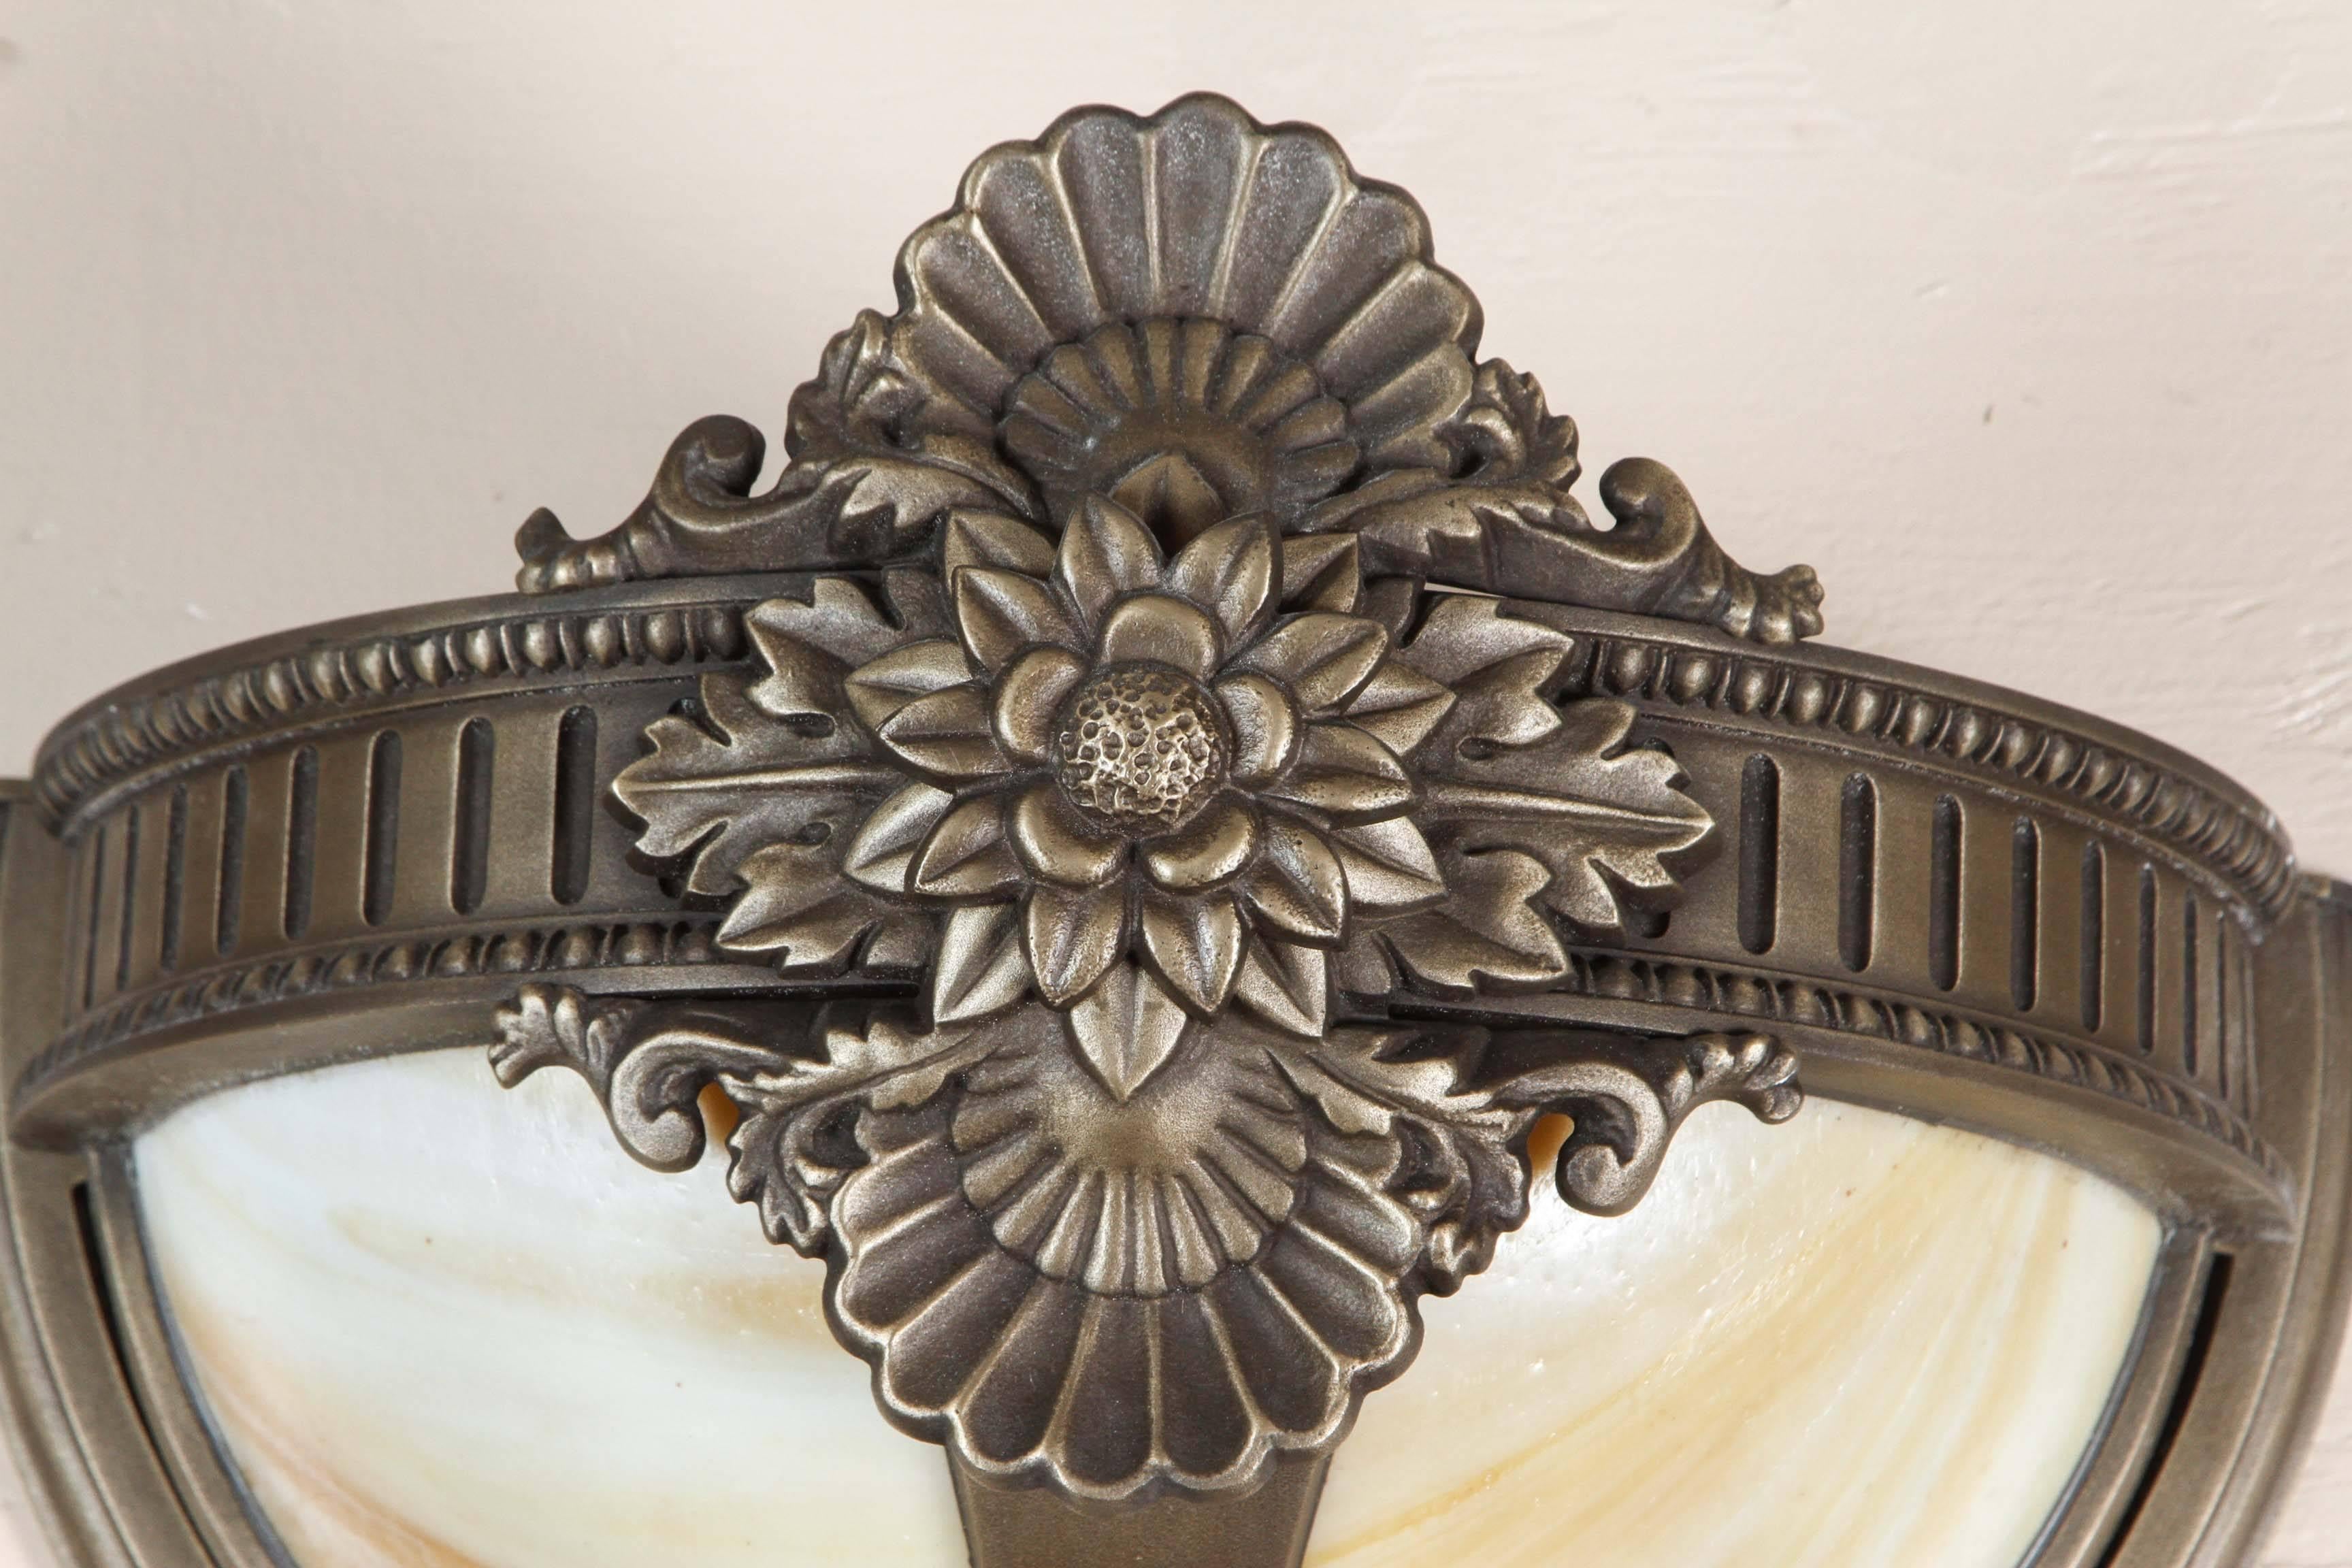 Bronze wall sconce with slag glass in a floral design. Several available at time of posting. Priced each. Please inquire. This can be seen at our 1800 South Grand Ave location in Downtown Los Angeles.